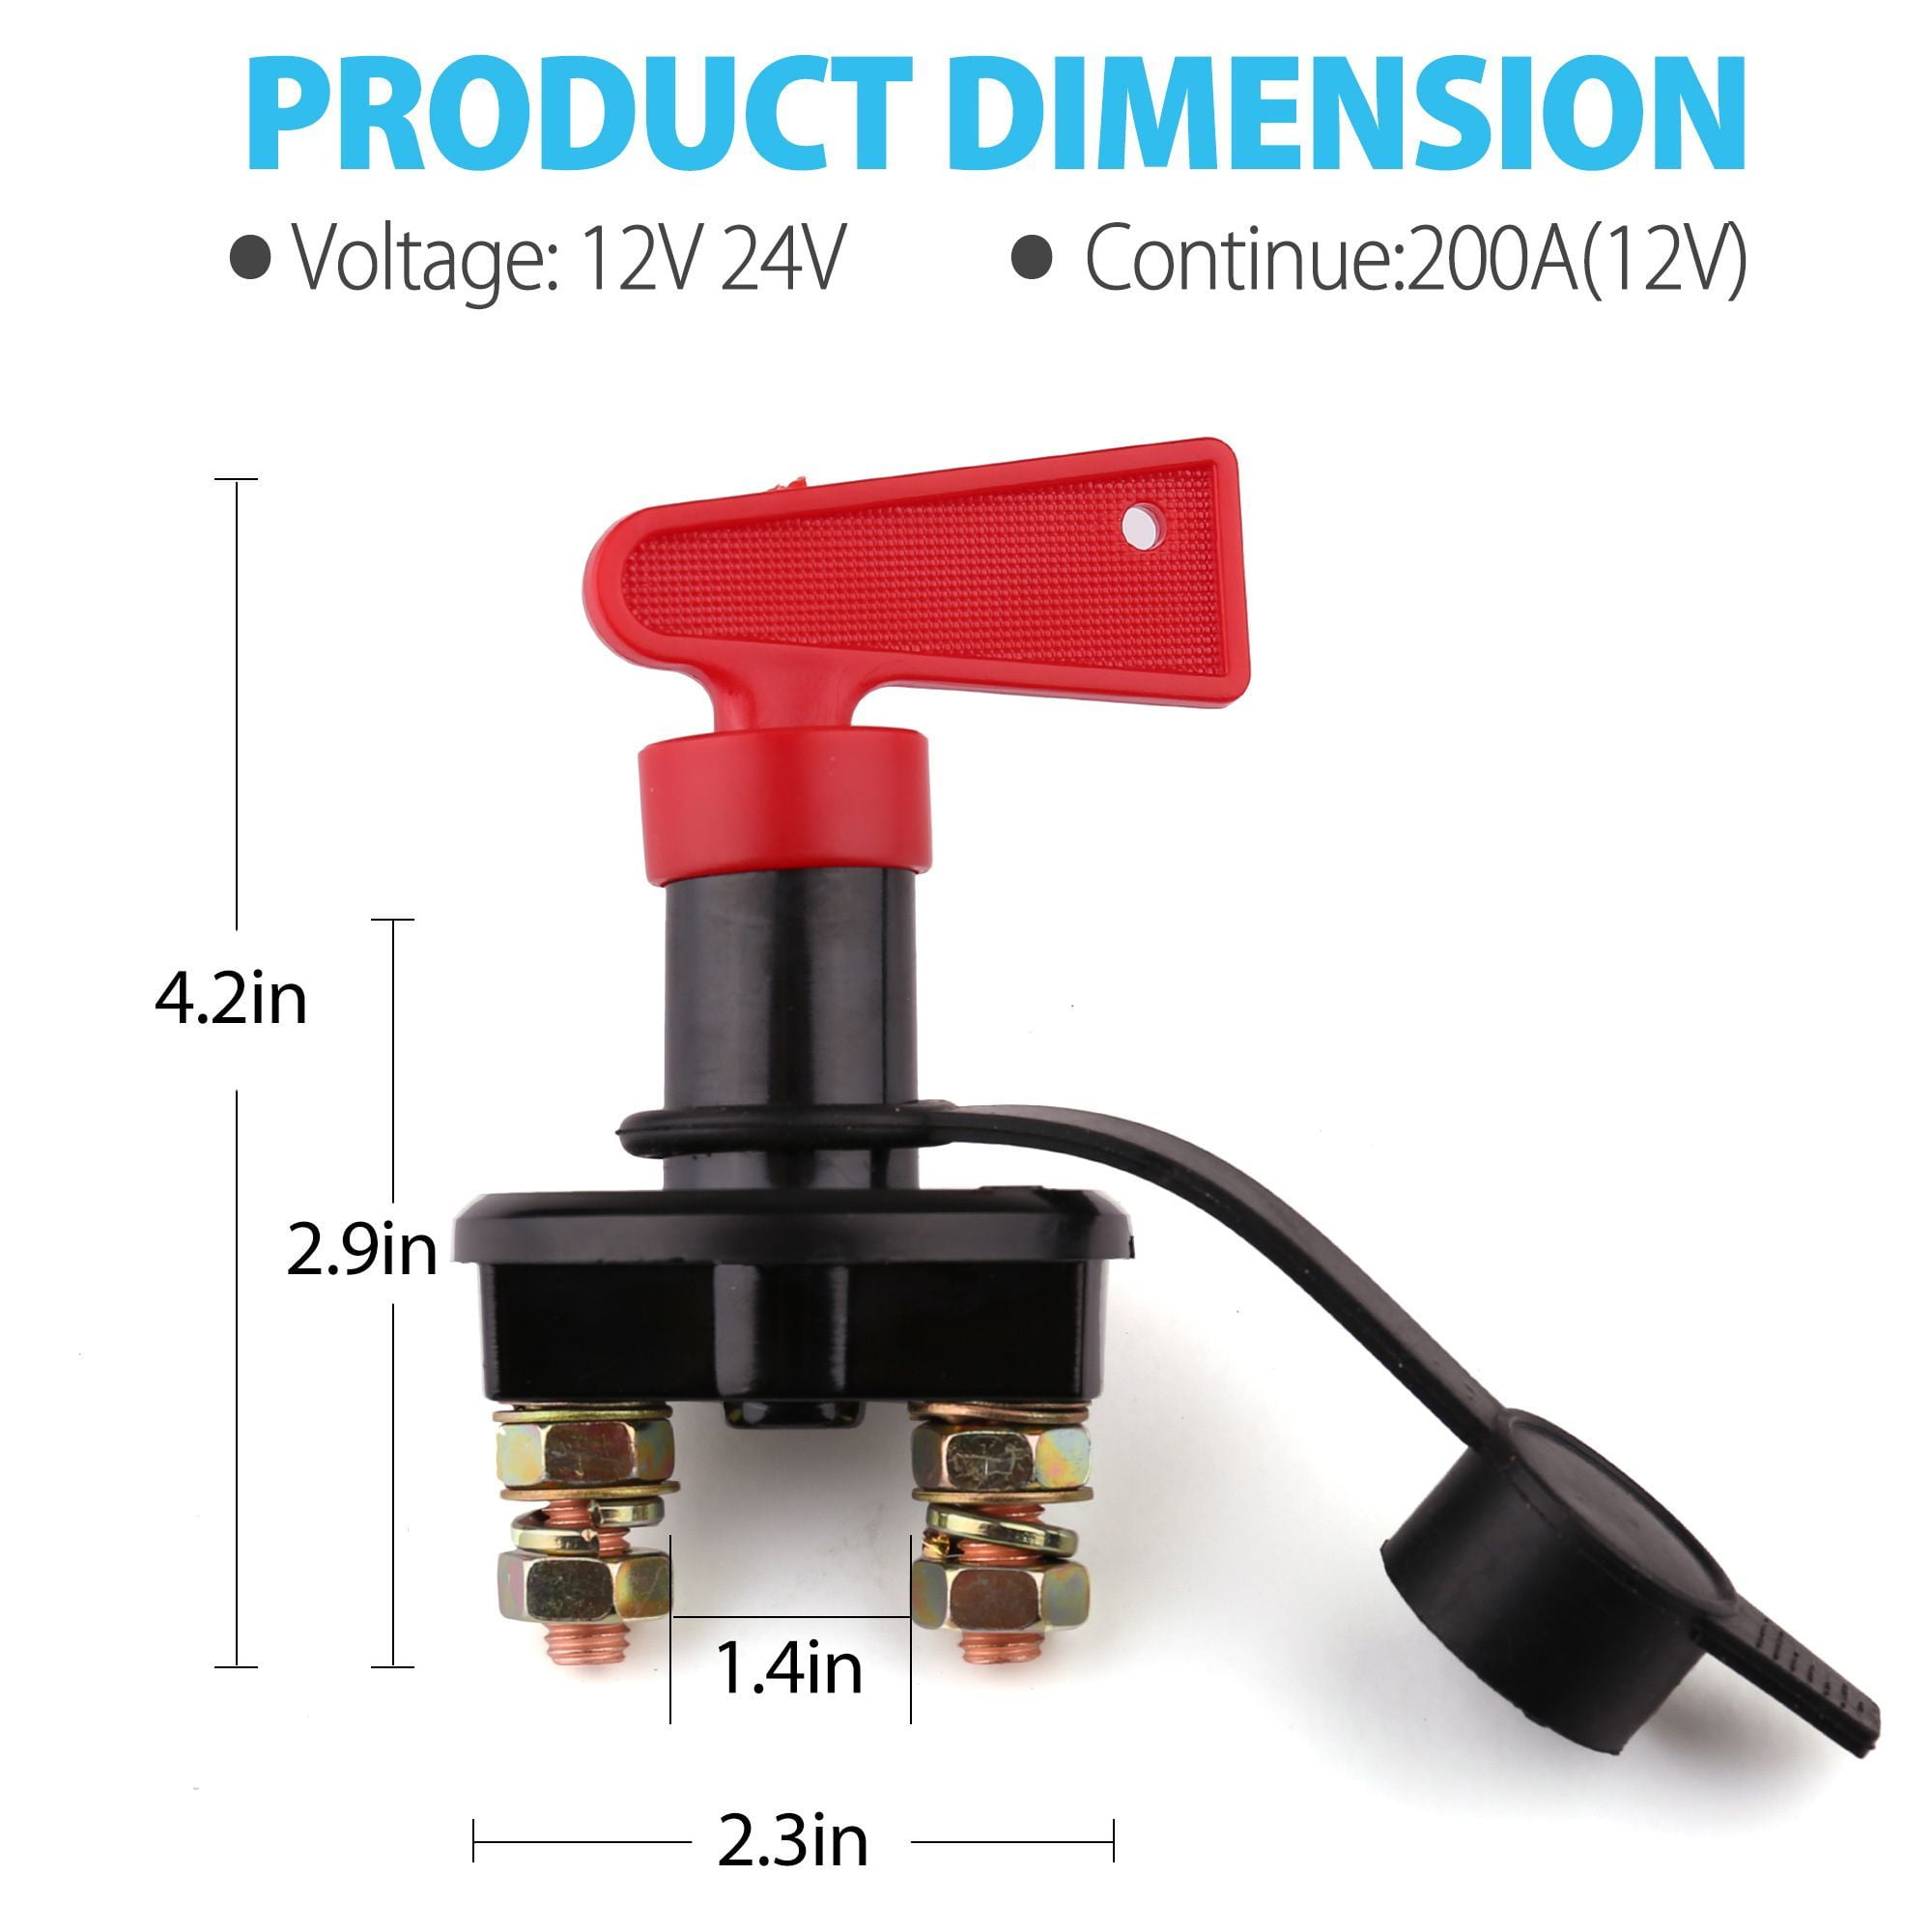 12V Car Battery Disconnect Cut Off Isolator Master Switch With Remote Control